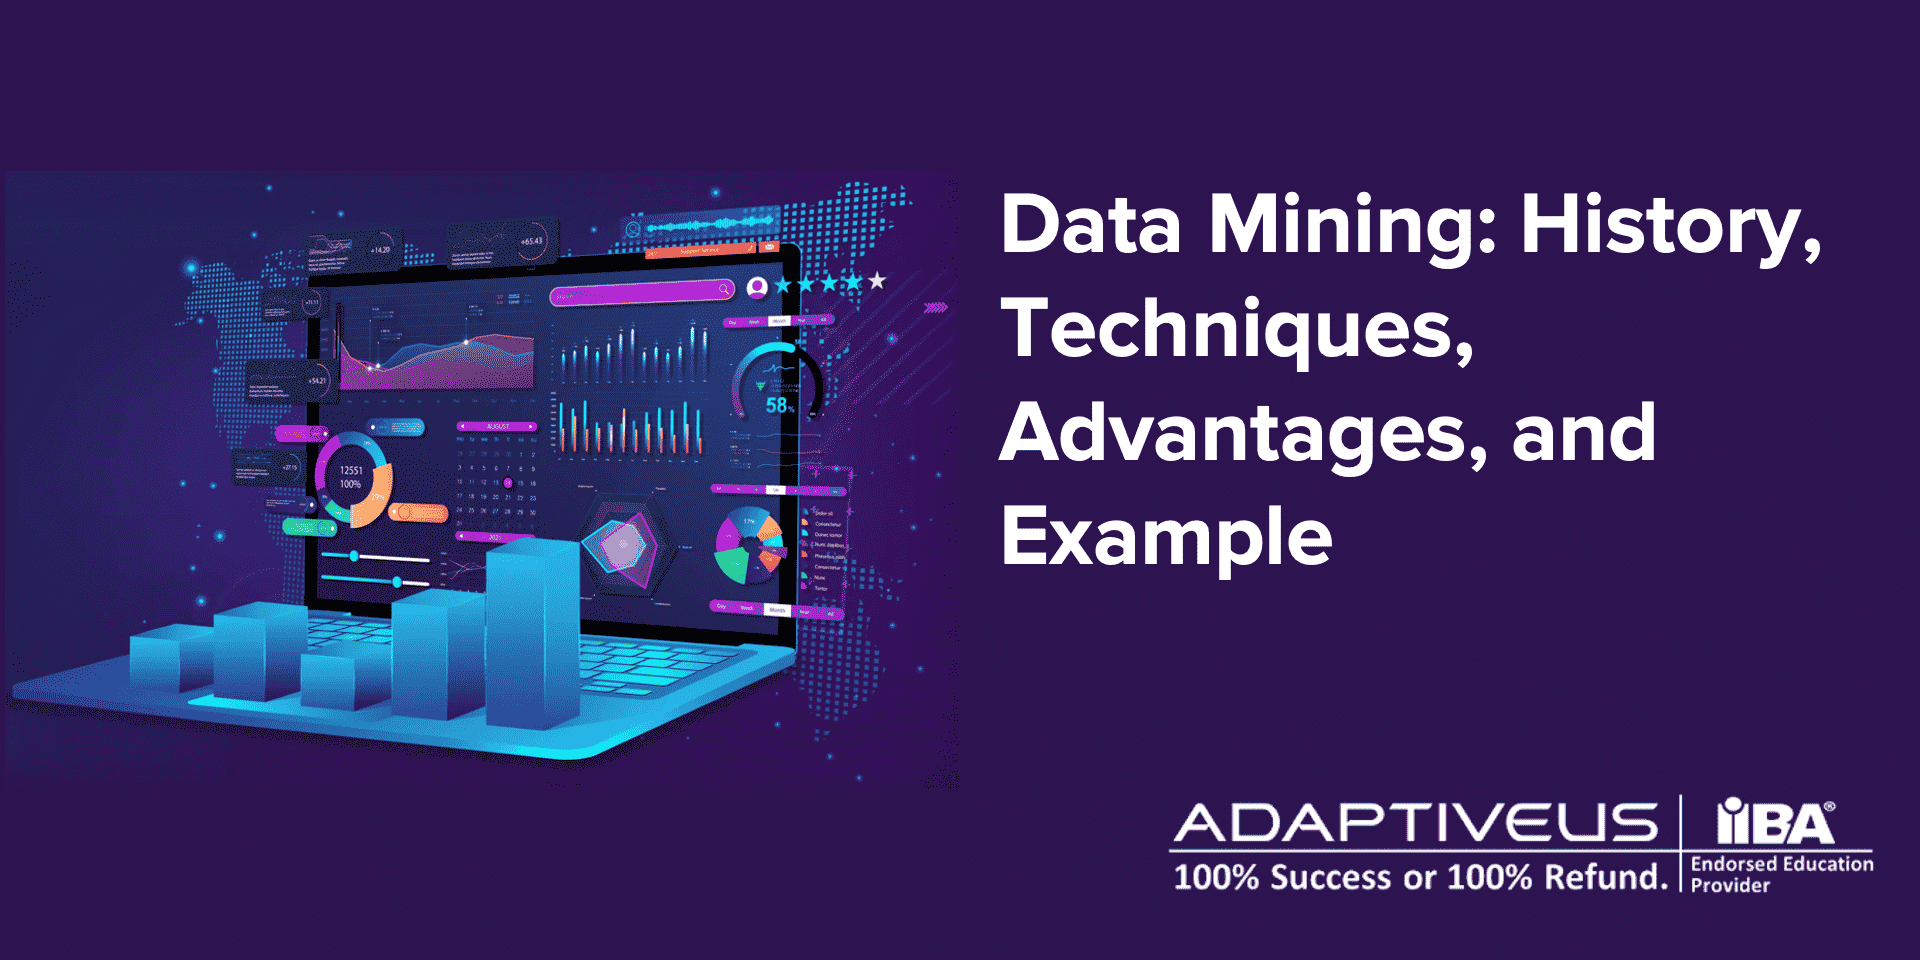 Data Mining- History, Techniques, Advantages, and Example